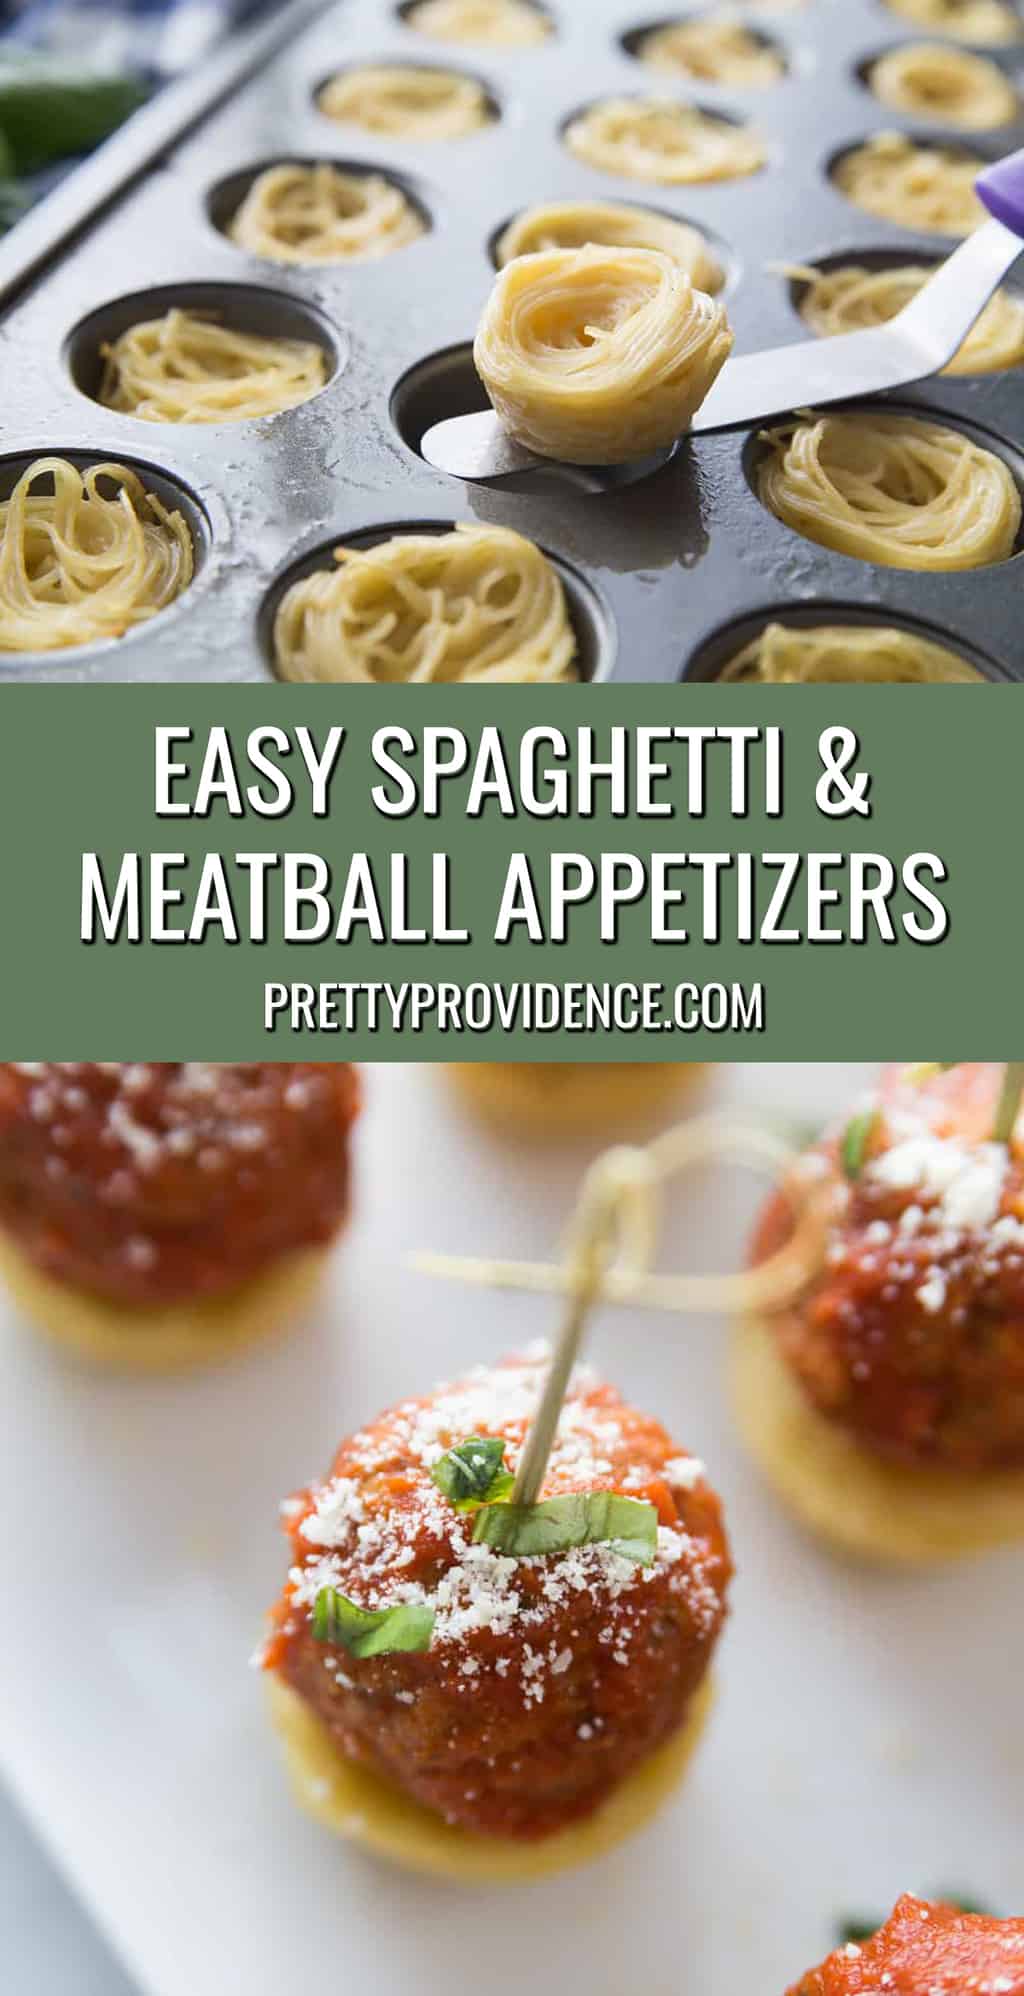 Easy Spaghetti and Meatball Appetizers by Pretty Providence